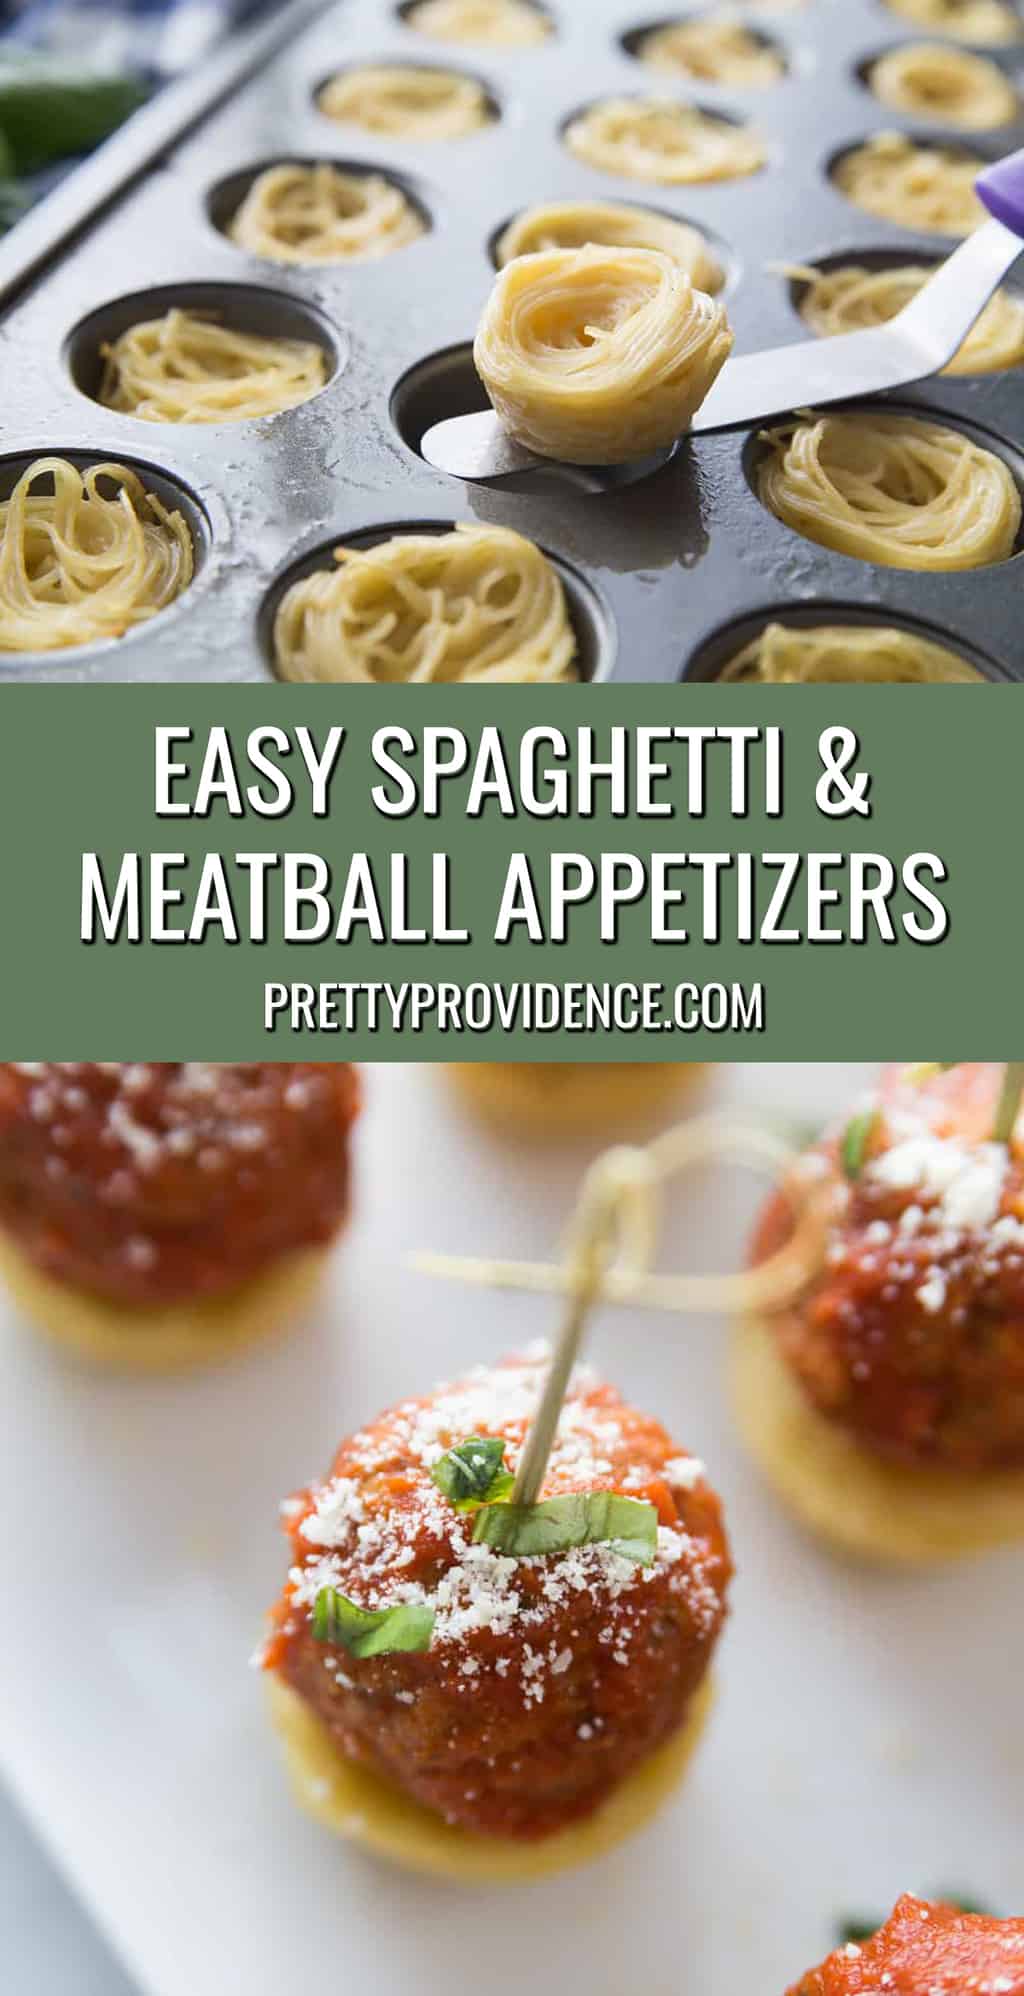 Easy Spaghetti and Meatball Appetizers by Pretty Providence